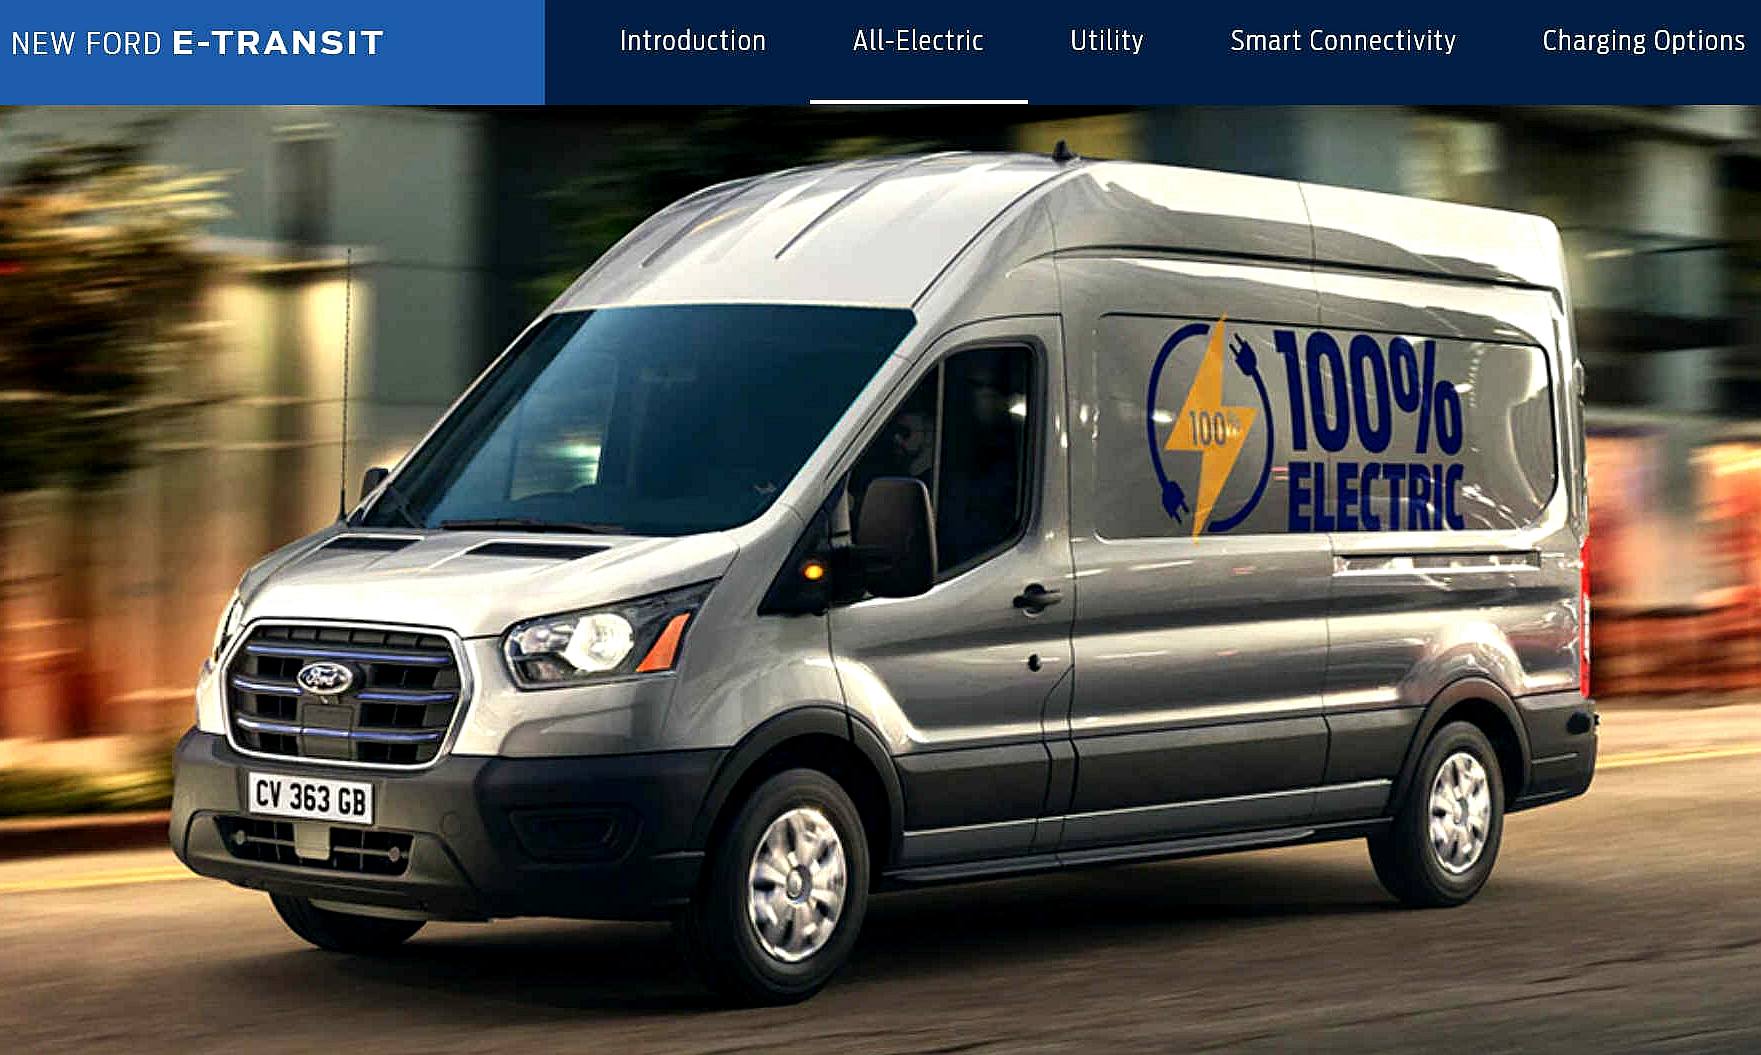 Ford E-Transit battery powered electric delivery van